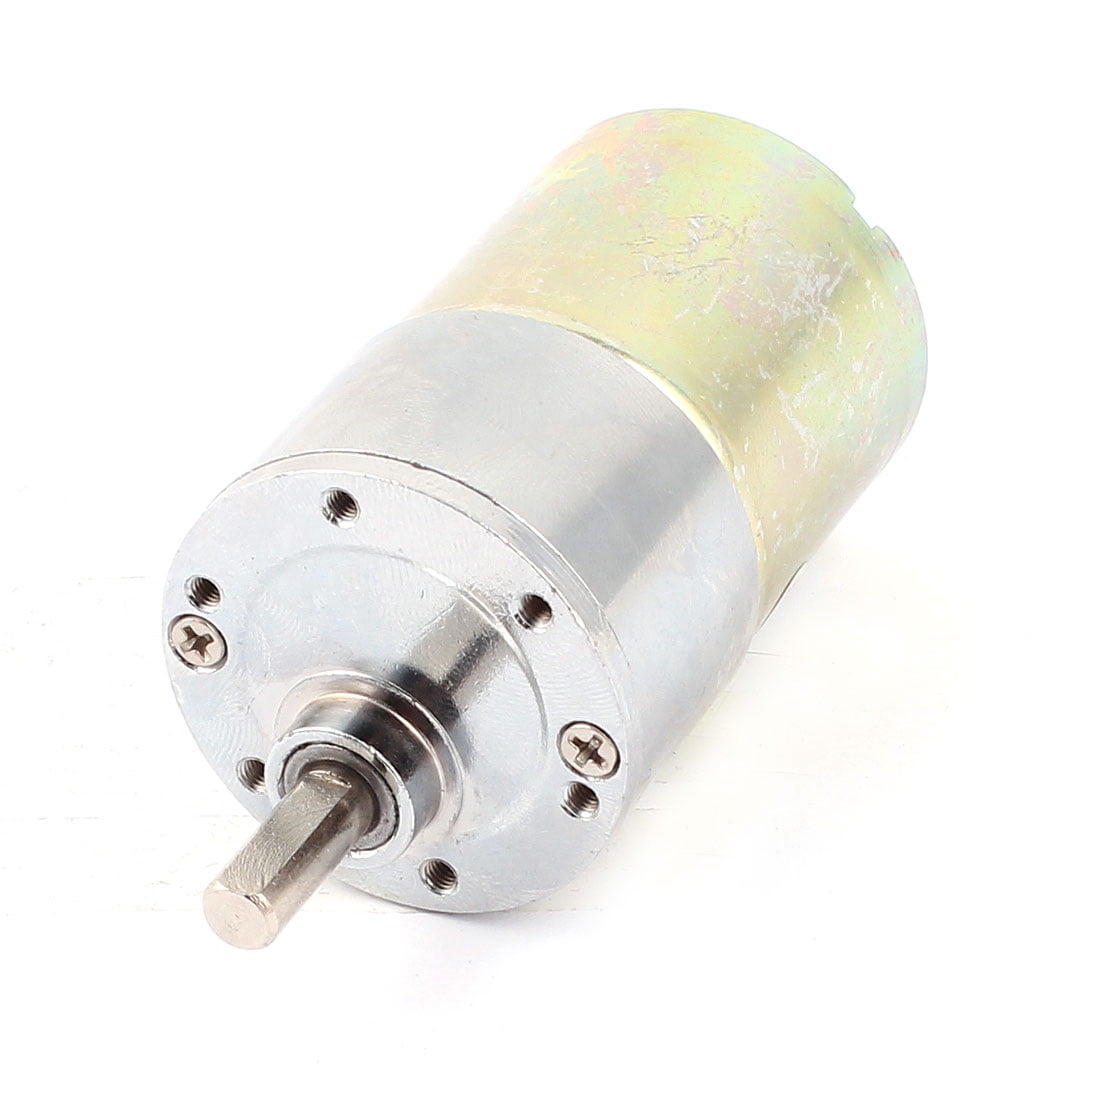 Details about   300RPM 2 Poles Electric Vehicle Geared Motor Electric Gear Reduction 24V 350W US 